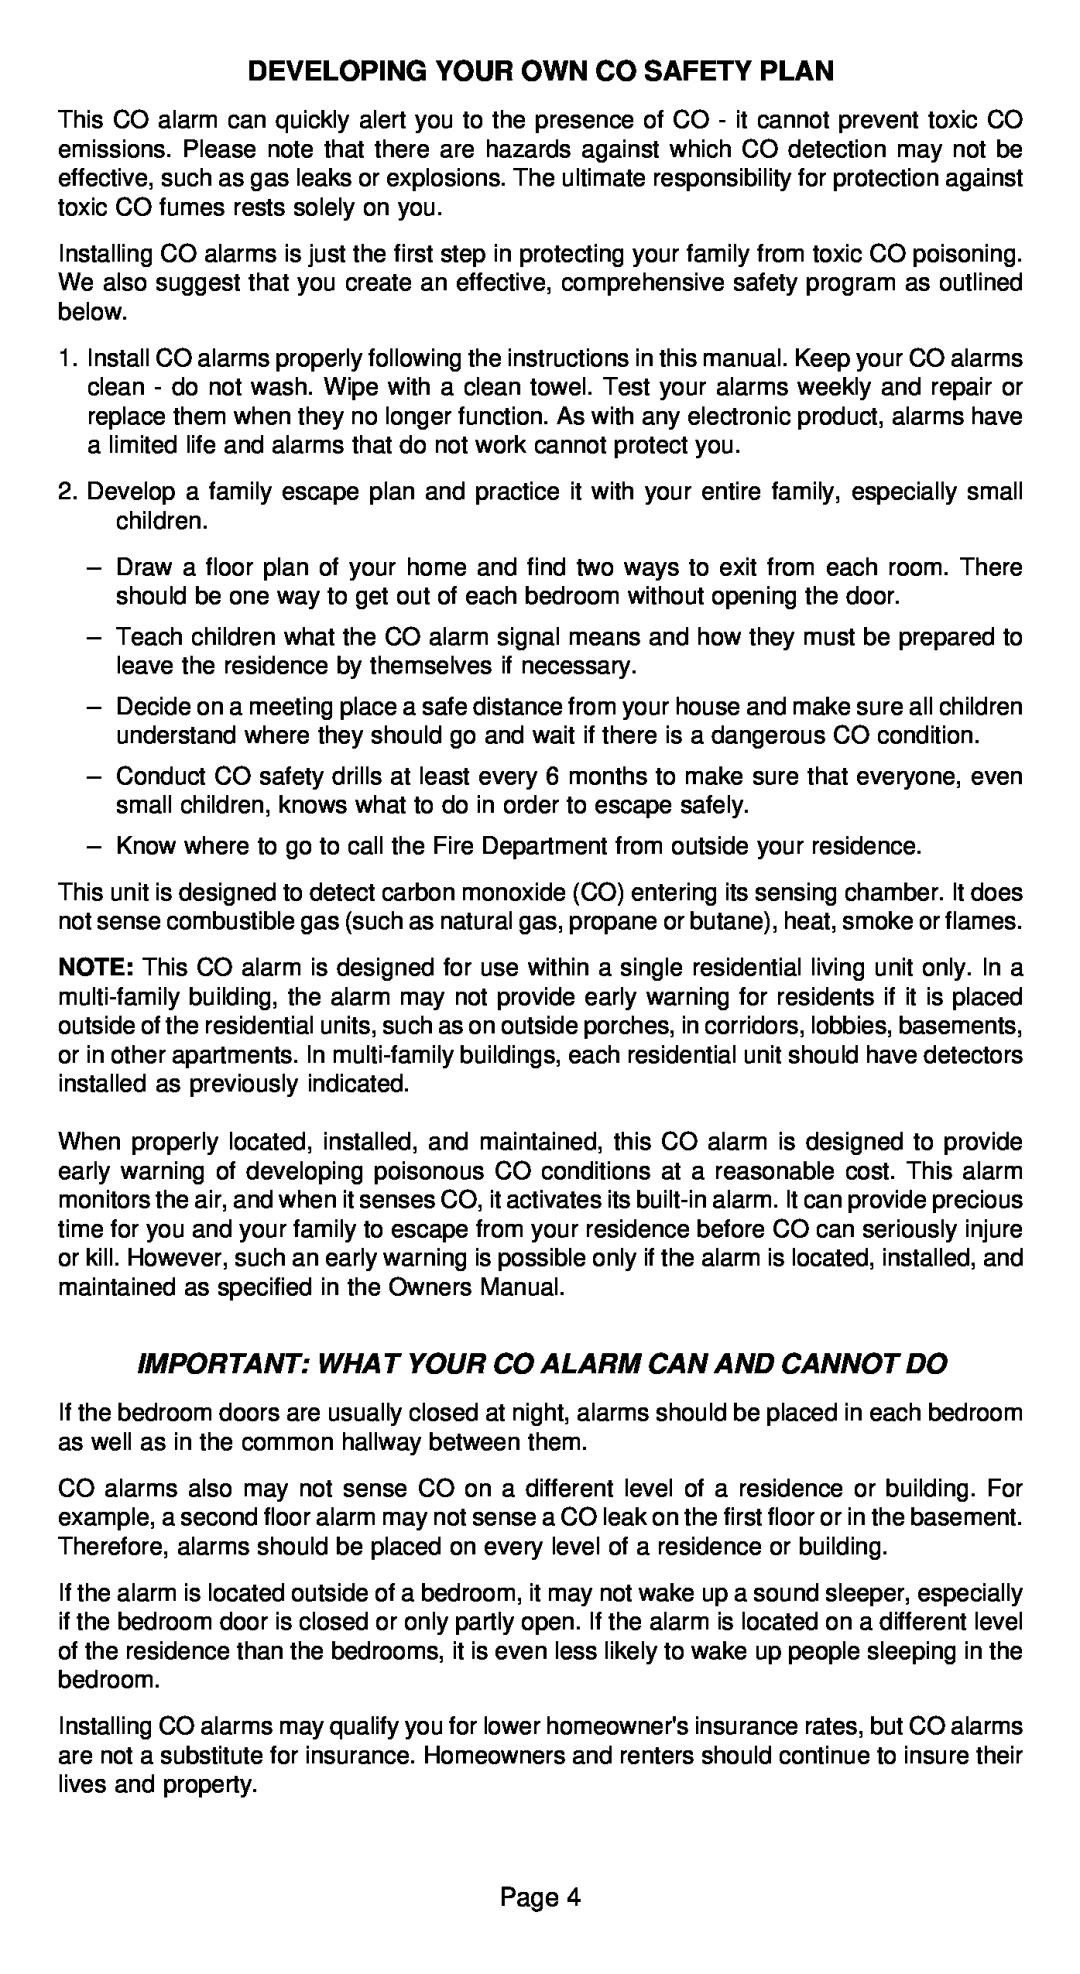 Universal CD-9685, CD-9585 owner manual Developing Your Own Co Safety Plan, Important What Your Co Alarm Can And Cannot Do 